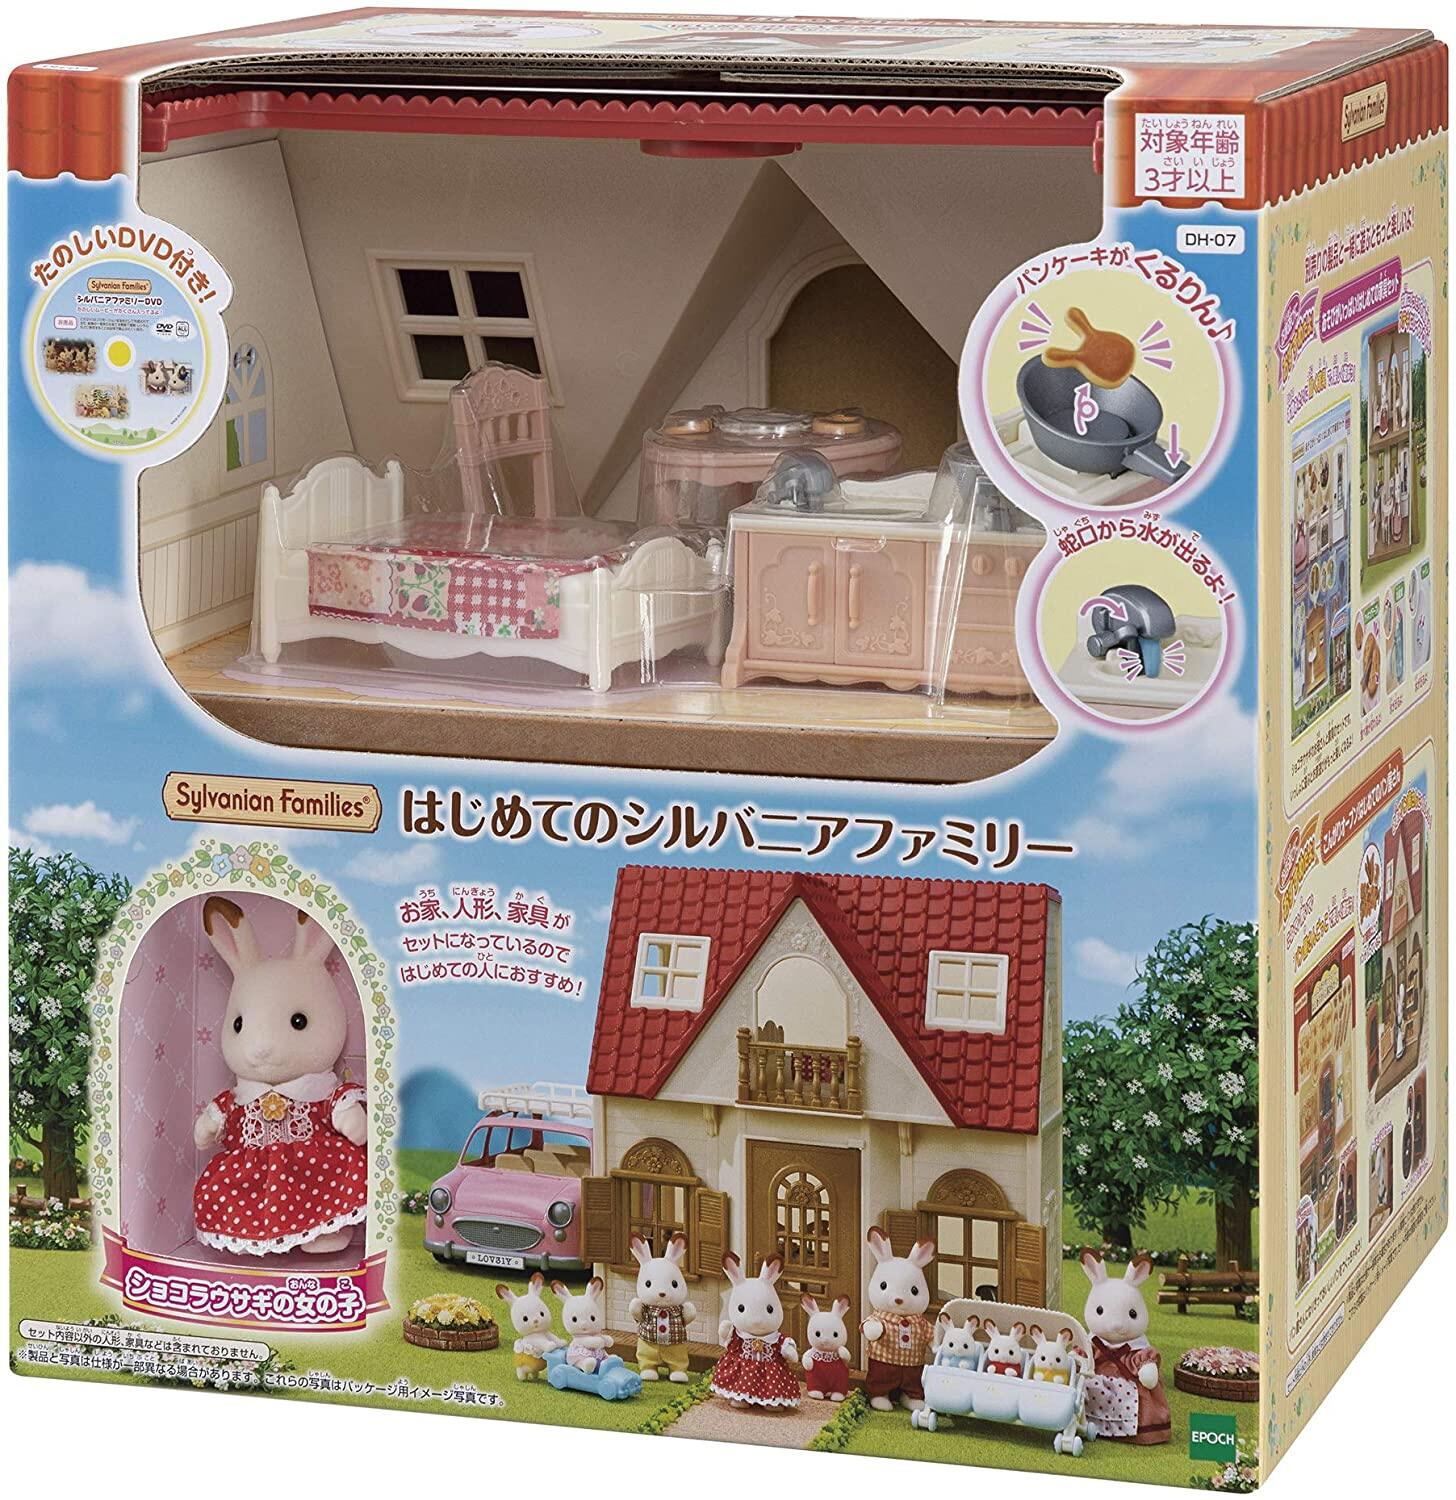 Calico Critters Sylvanian Families House with red roof elevator w/tracking JAPAN 